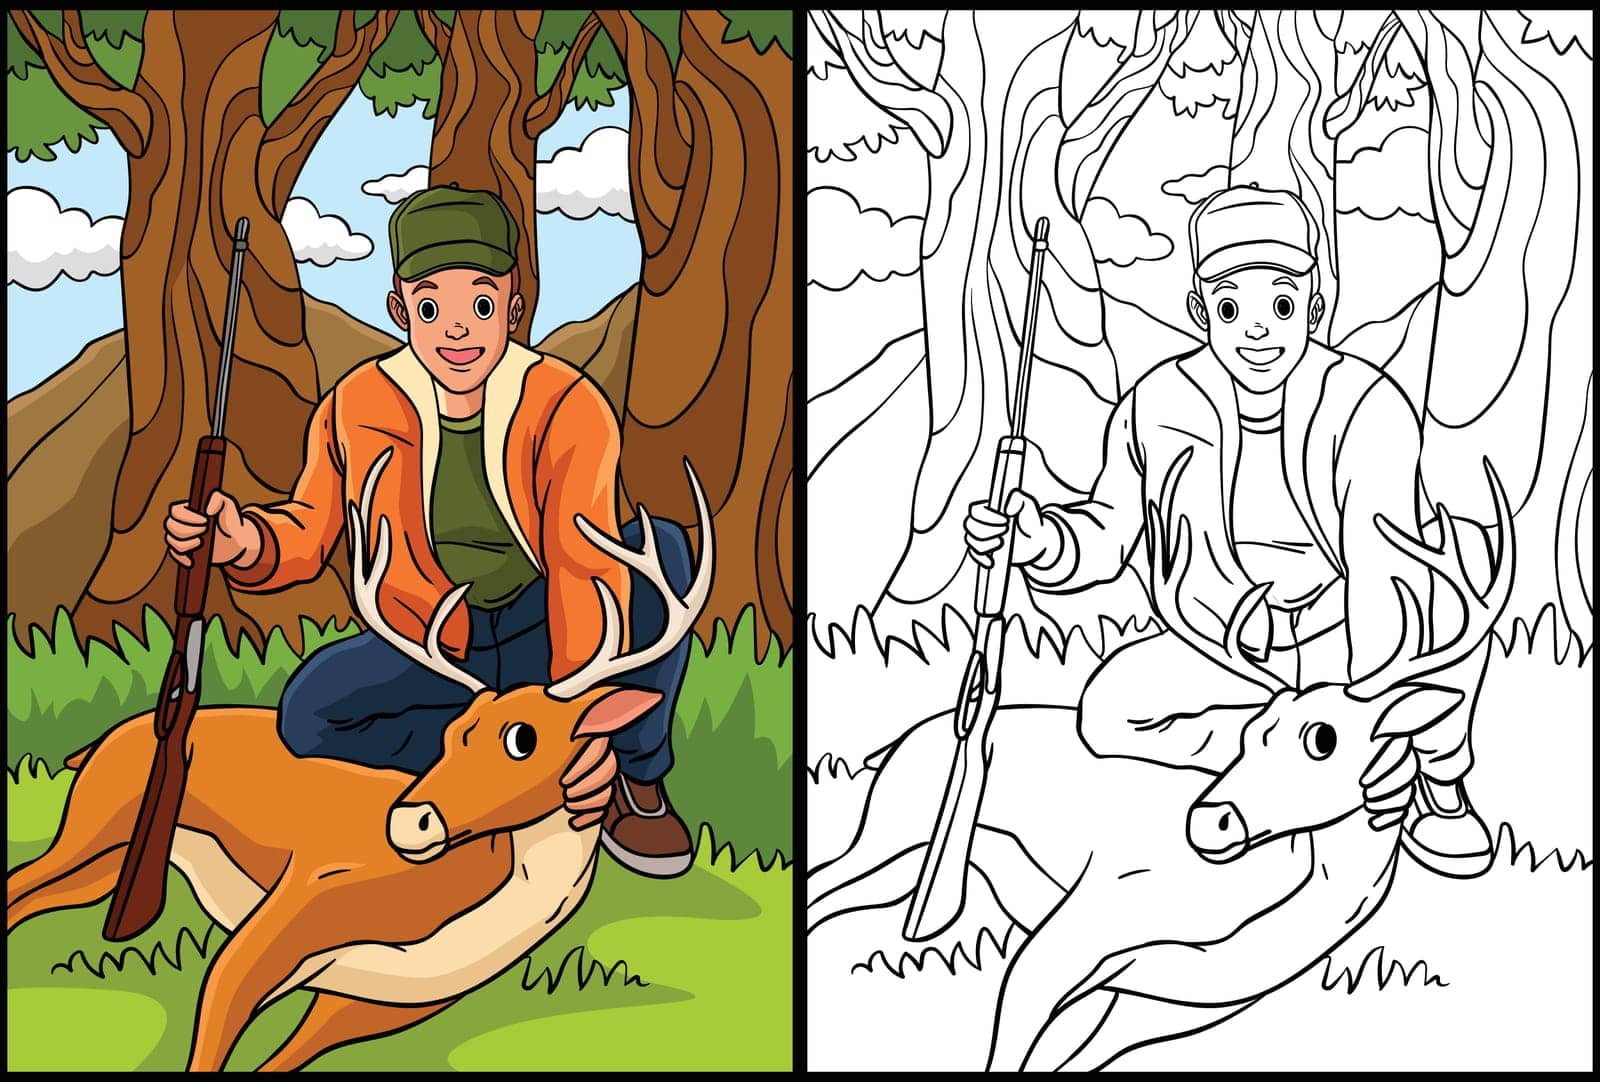 This coloring page shows Deer Hunting. One side of this illustration is colored and serves as an inspiration for children.